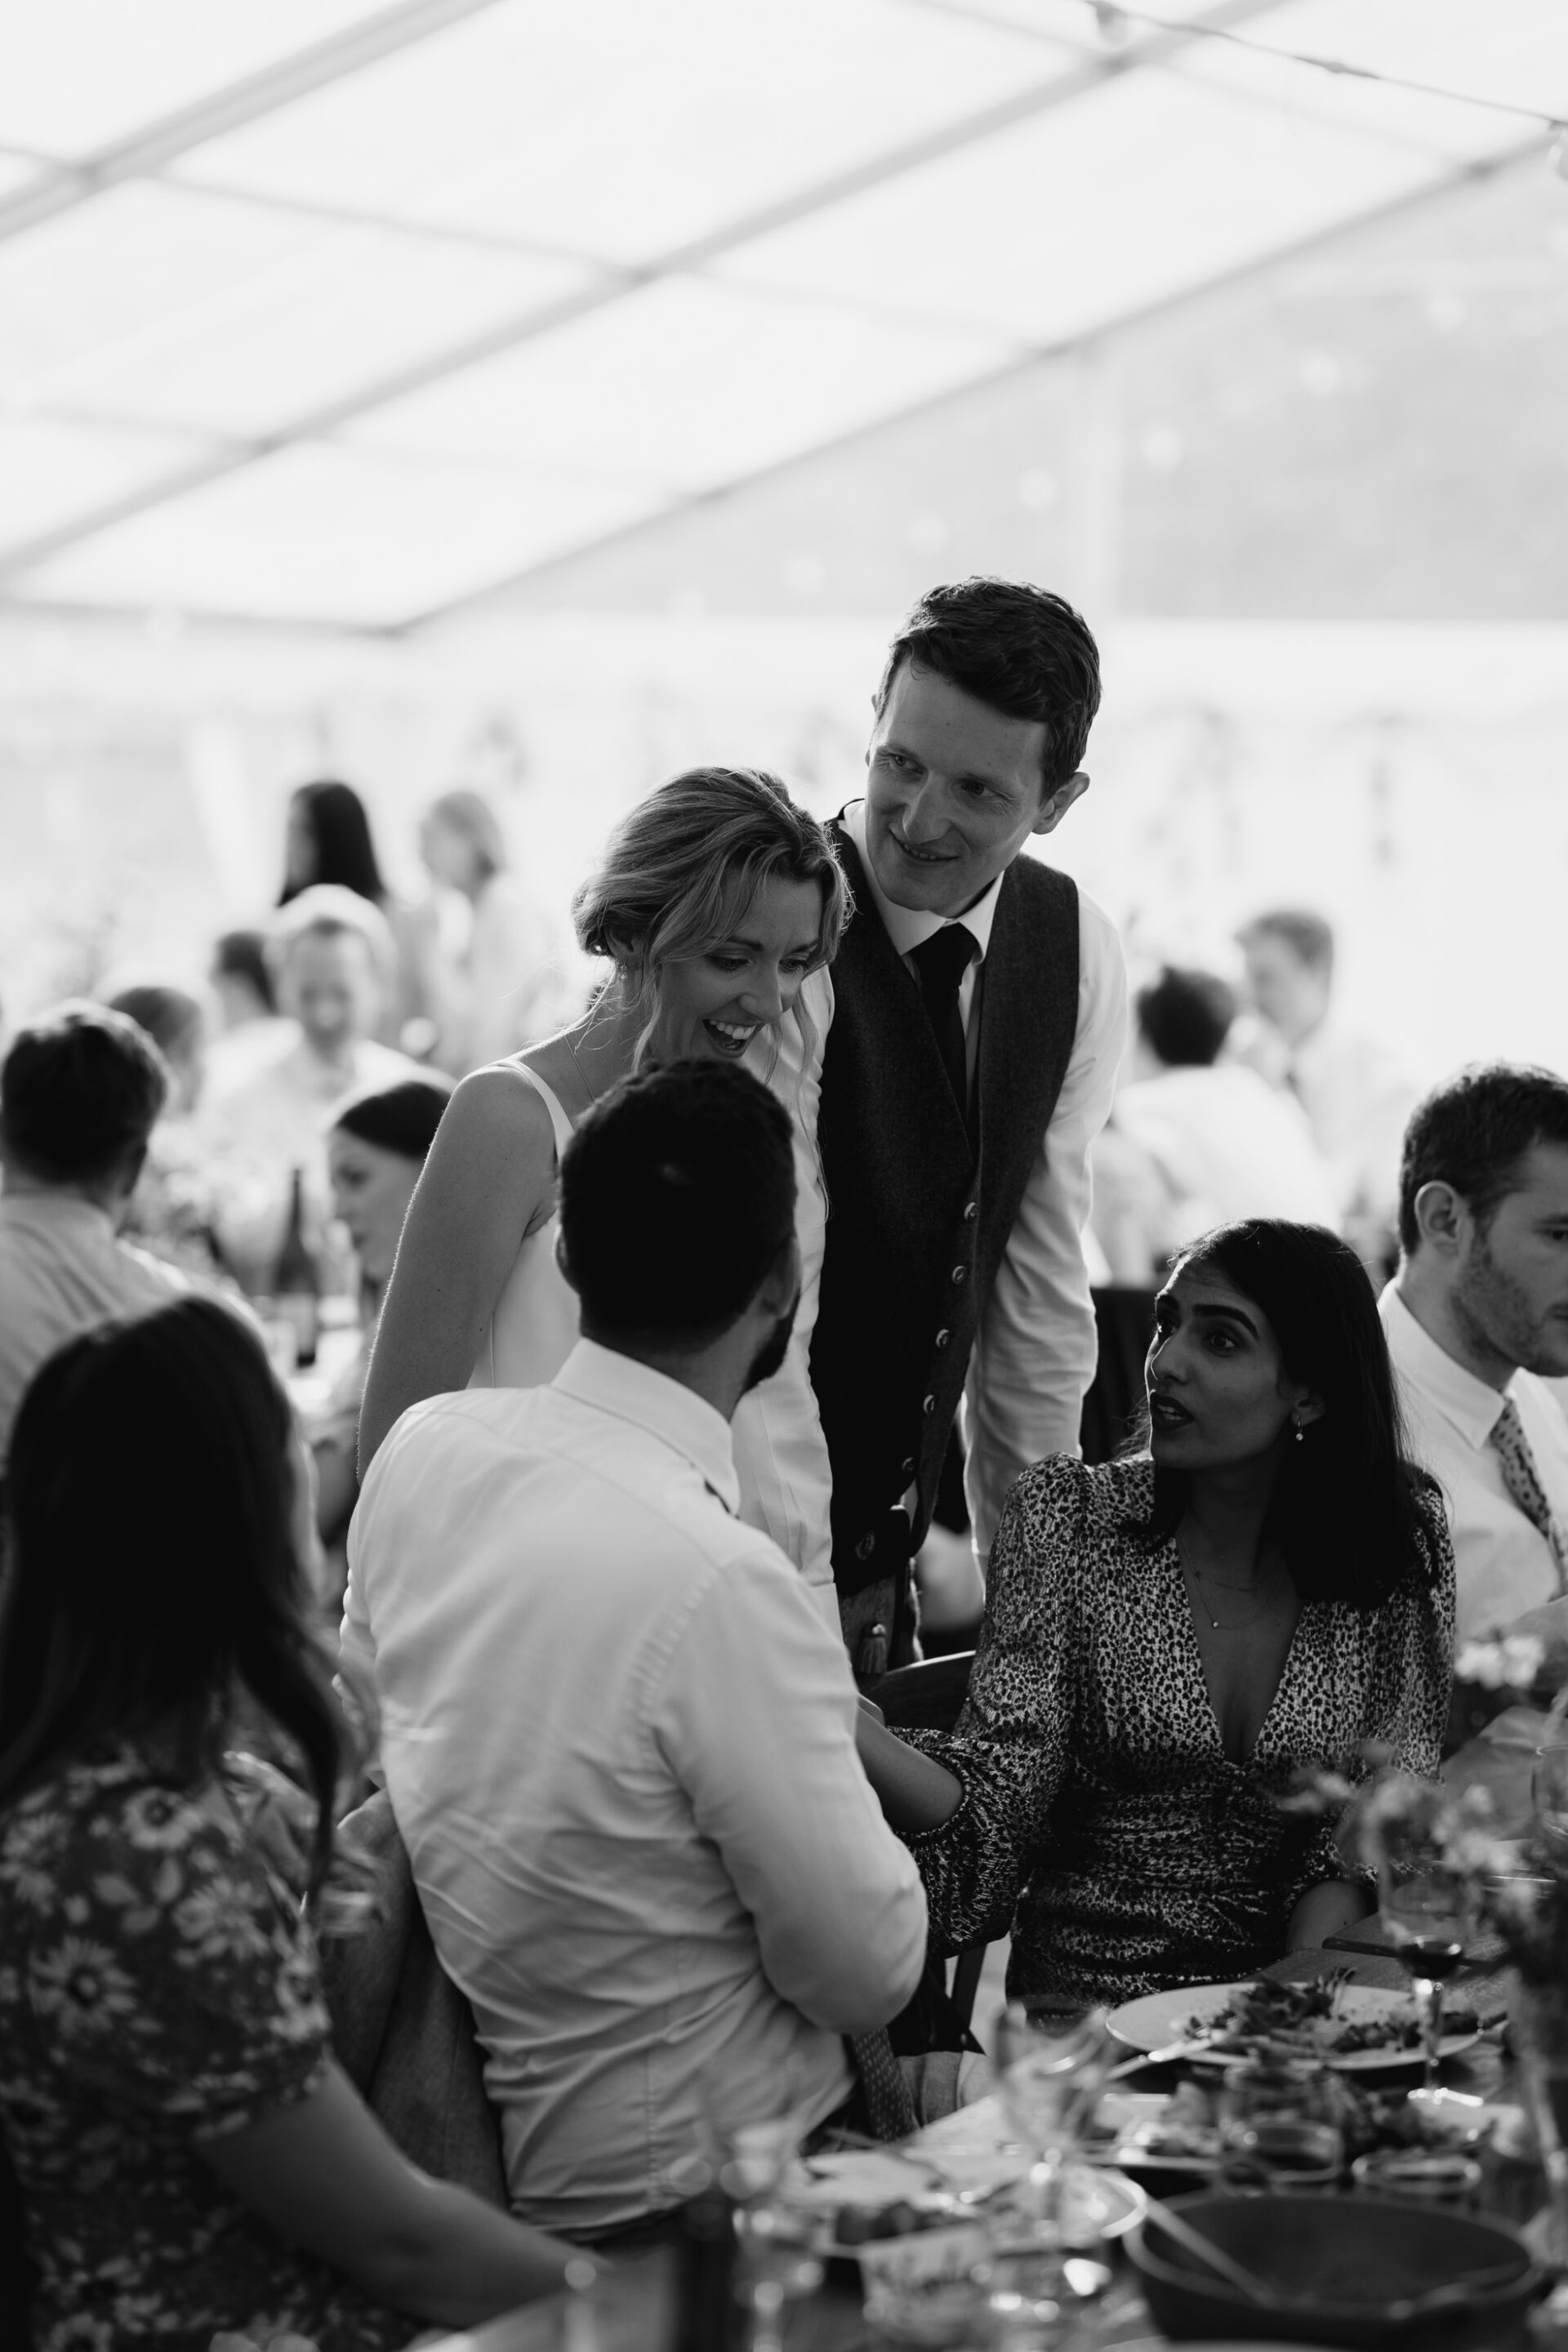 Bride and groom talk to guests during the wedding breakfast at their Devon marquee wedding